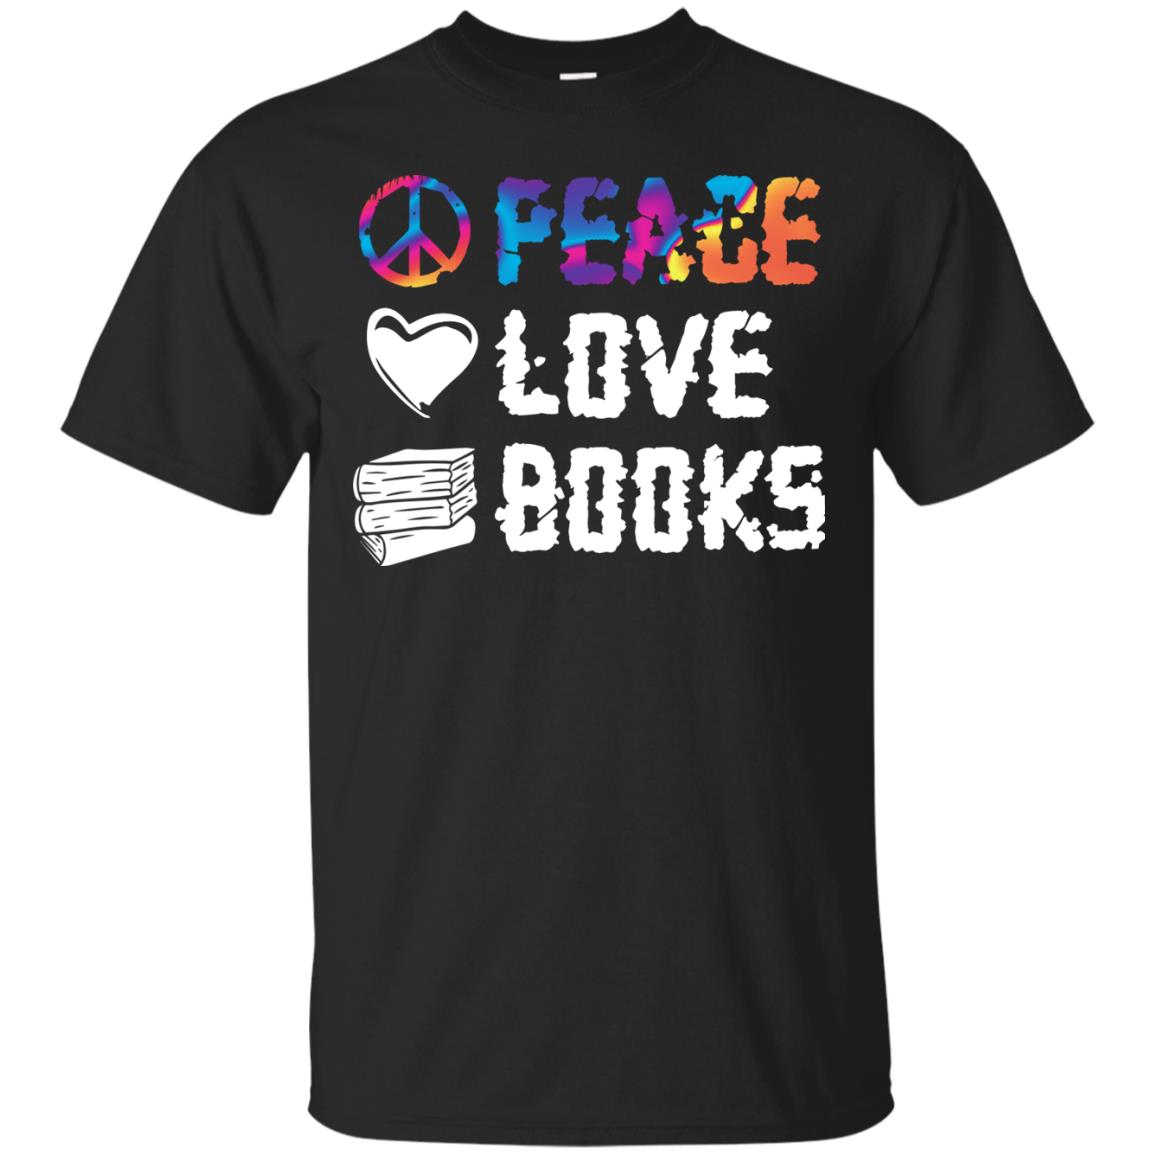 Peace Love Books Best Reading Shirt For Book Lover